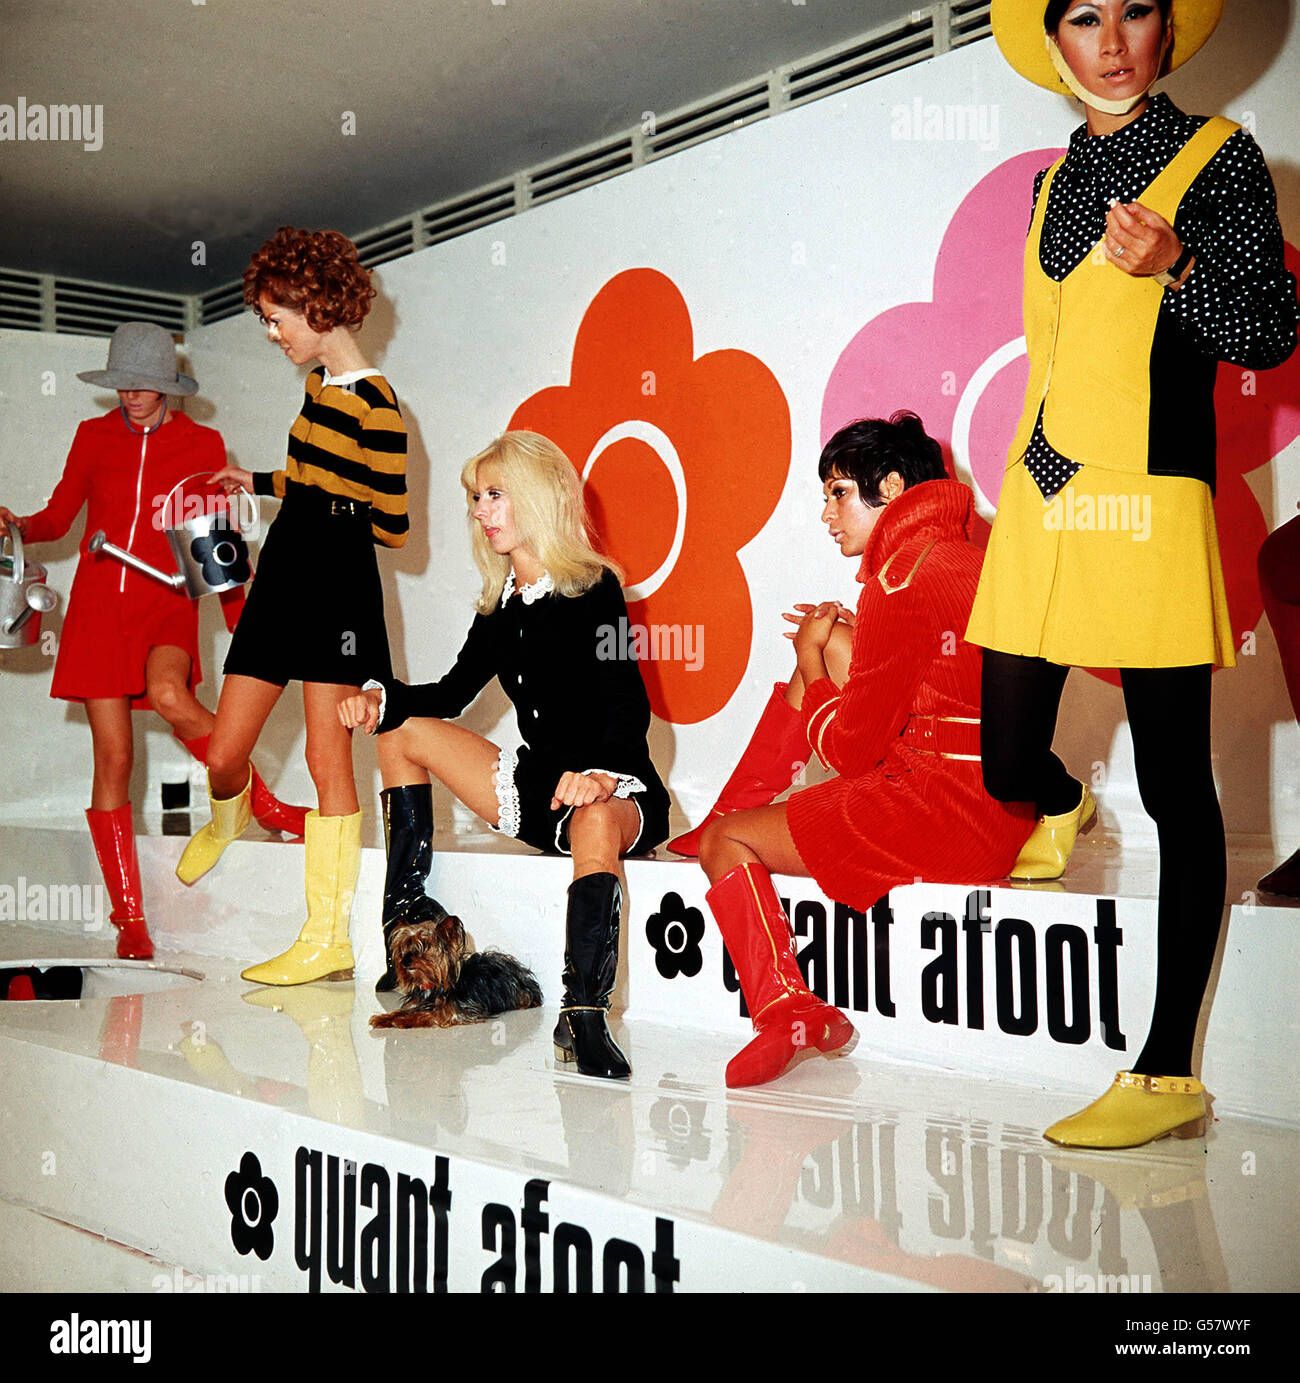 MARY QUANT FASHION : 1967. SWINGING SIXTIES 1967: Models present fashion creations by Mary Quant. Stock Photo